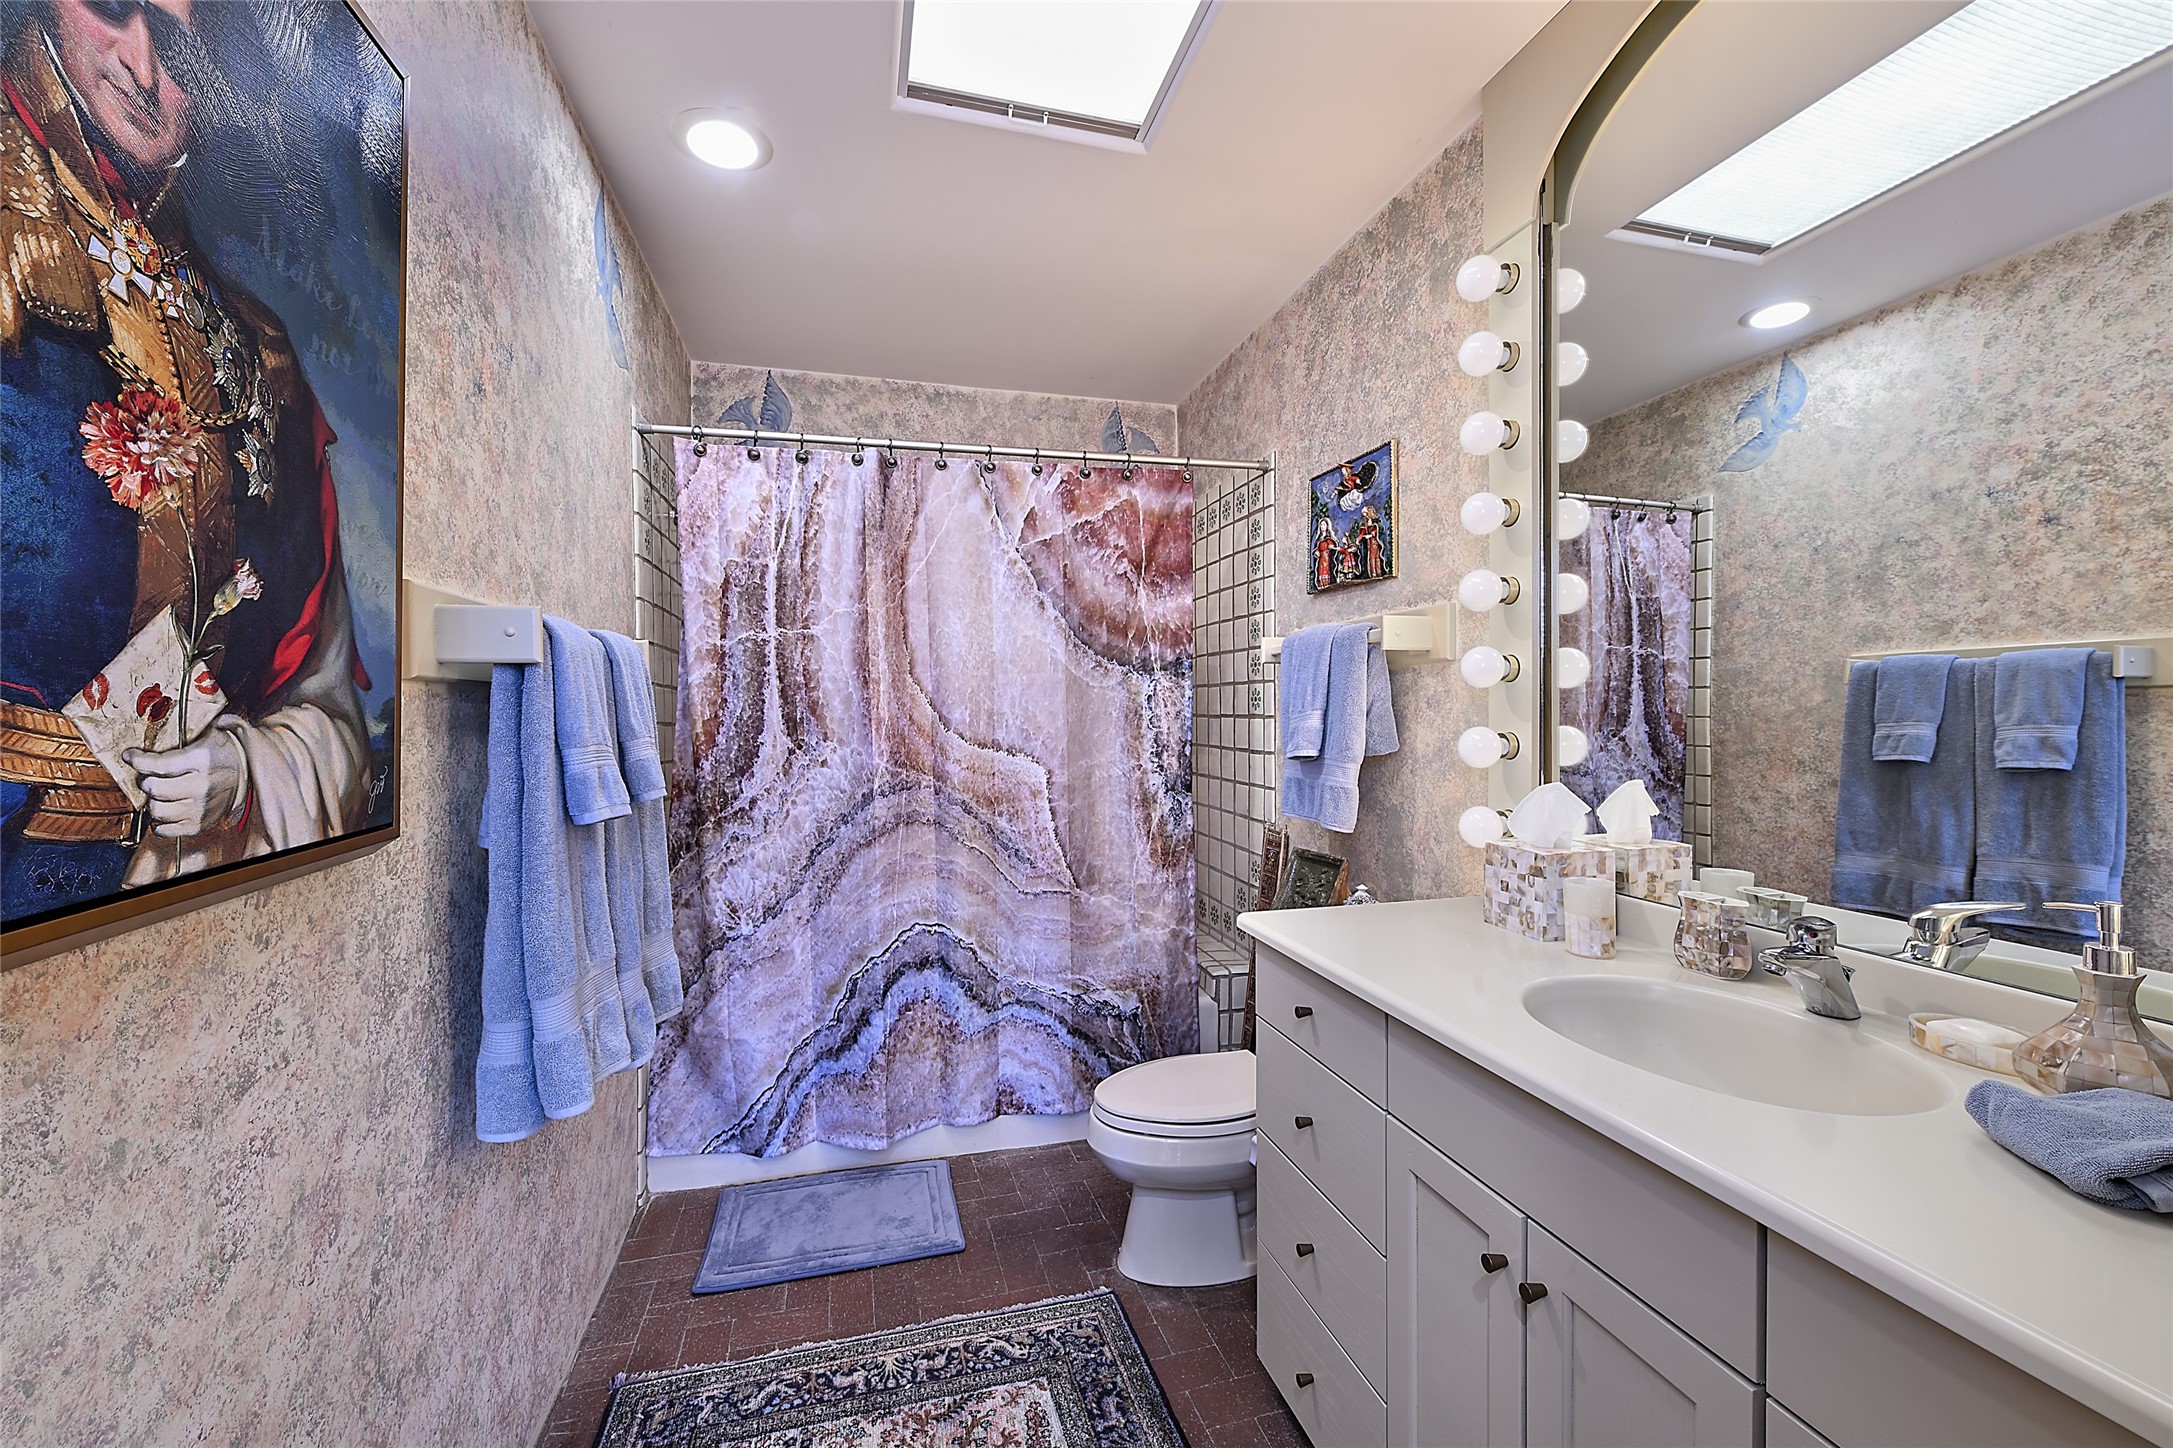 This spacious bath also offers a generous vanity with a large mirror and cosmetic lighting; faux-finished walls and the subdued ceramic tile of the tub shower create a unique, calming palette.